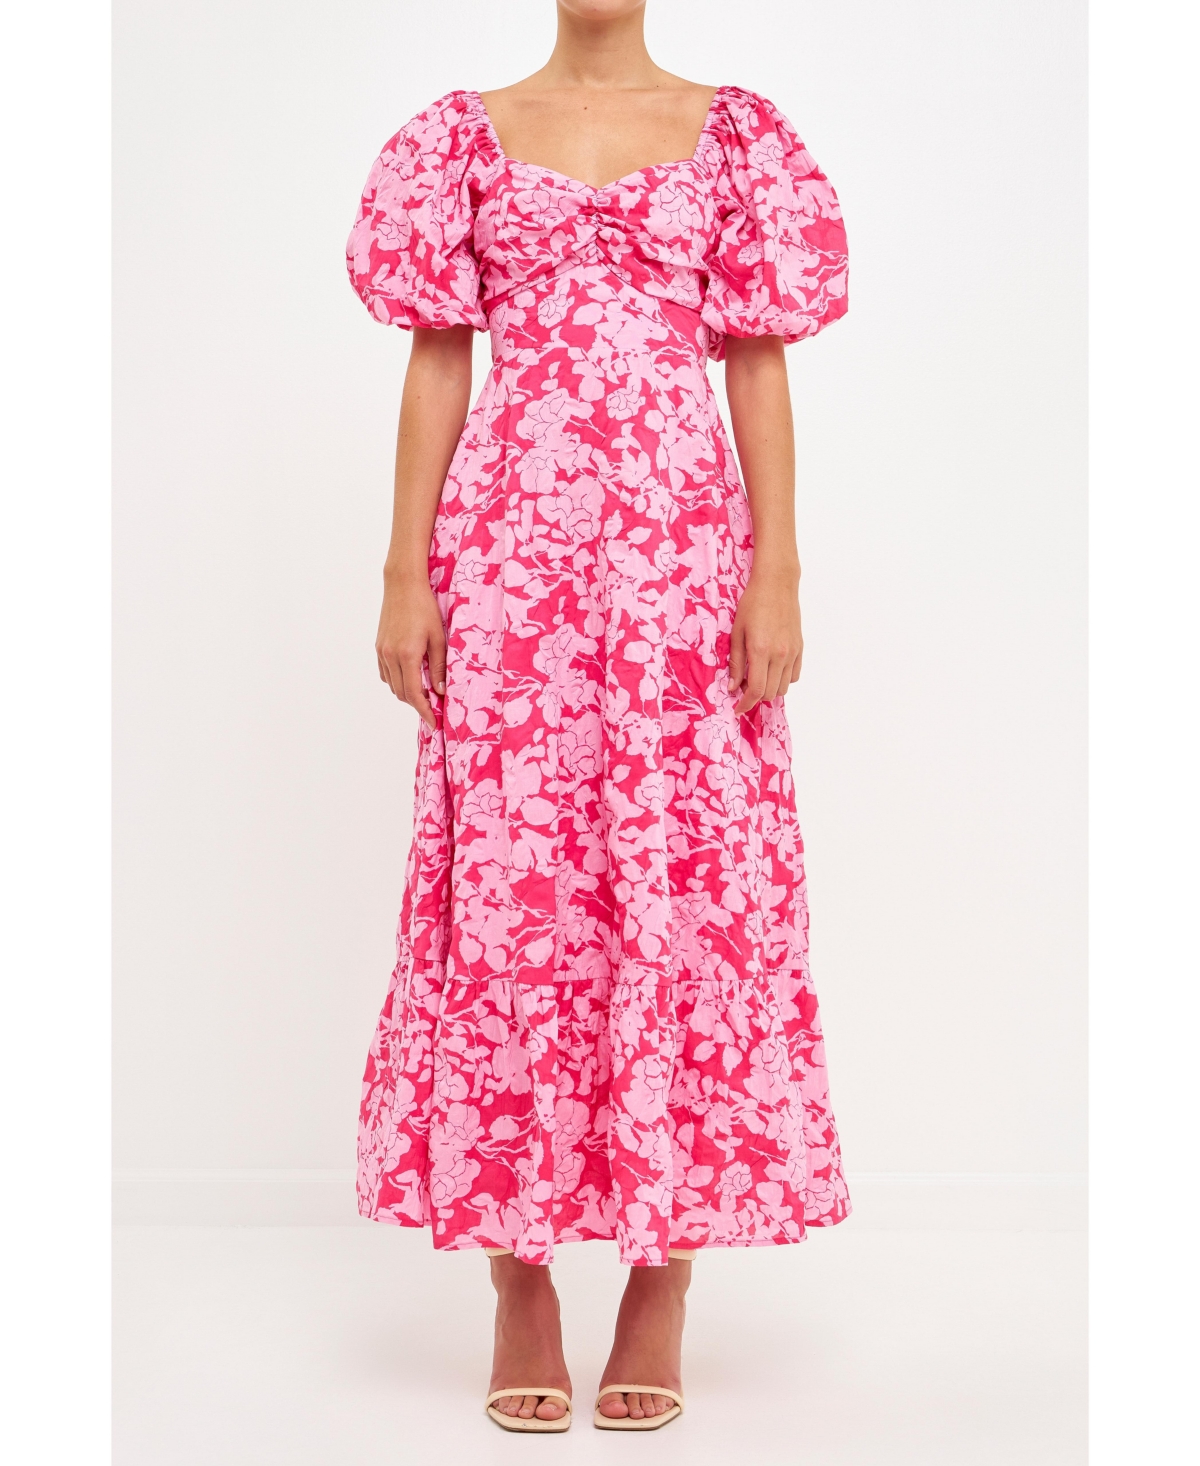 FREE THE ROSES WOMEN'S COMBO FLORAL BOW TIE MAXI DRESS